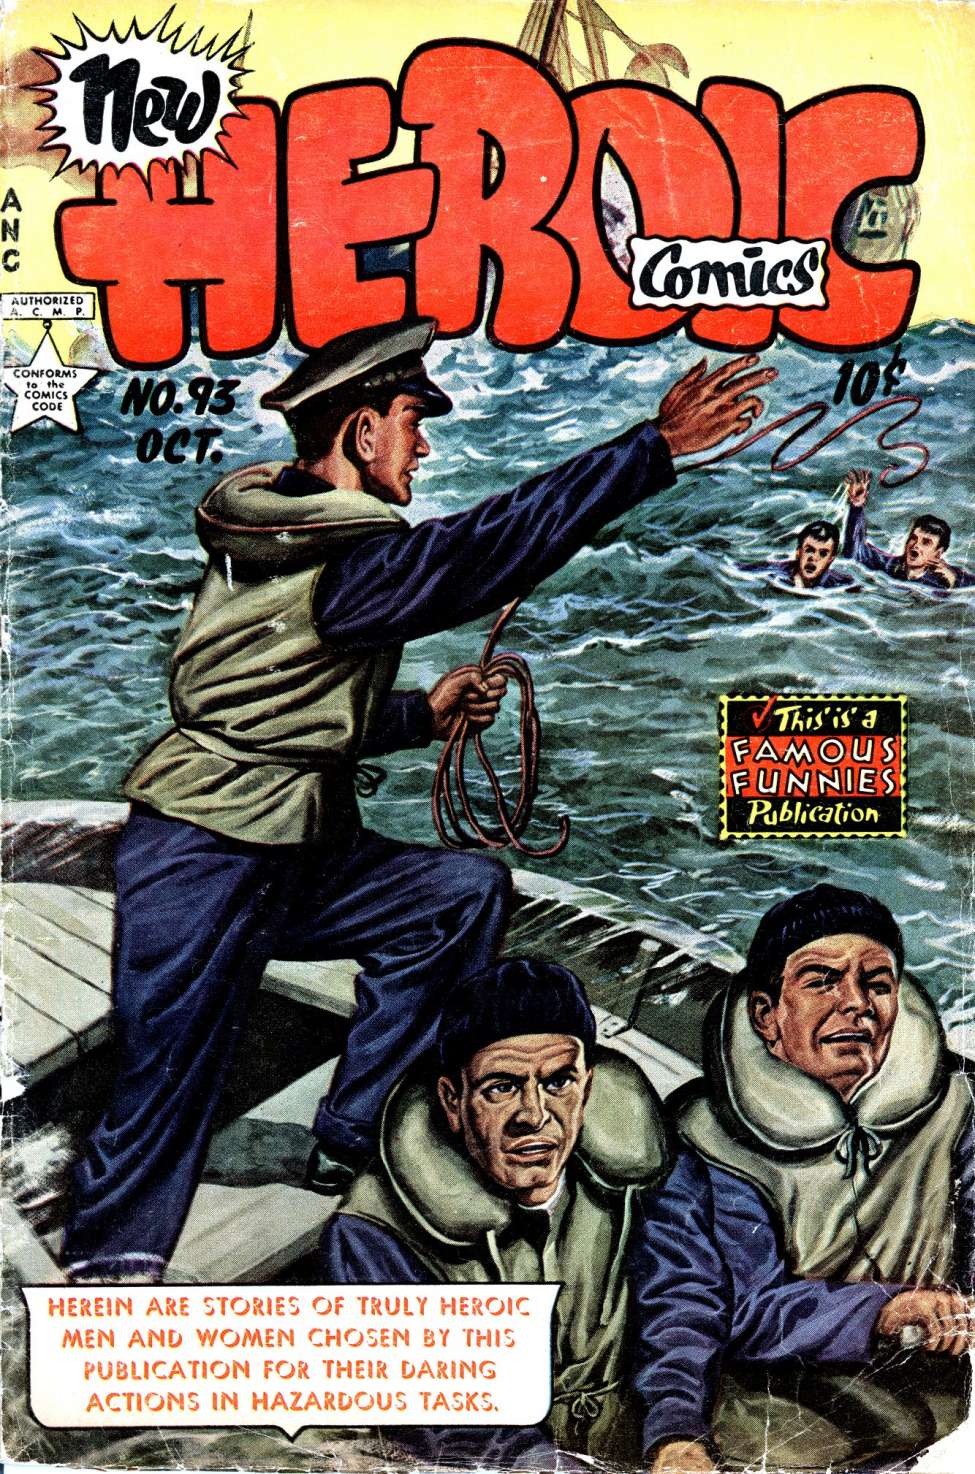 Book Cover For New Heroic Comics 93 - Version 2